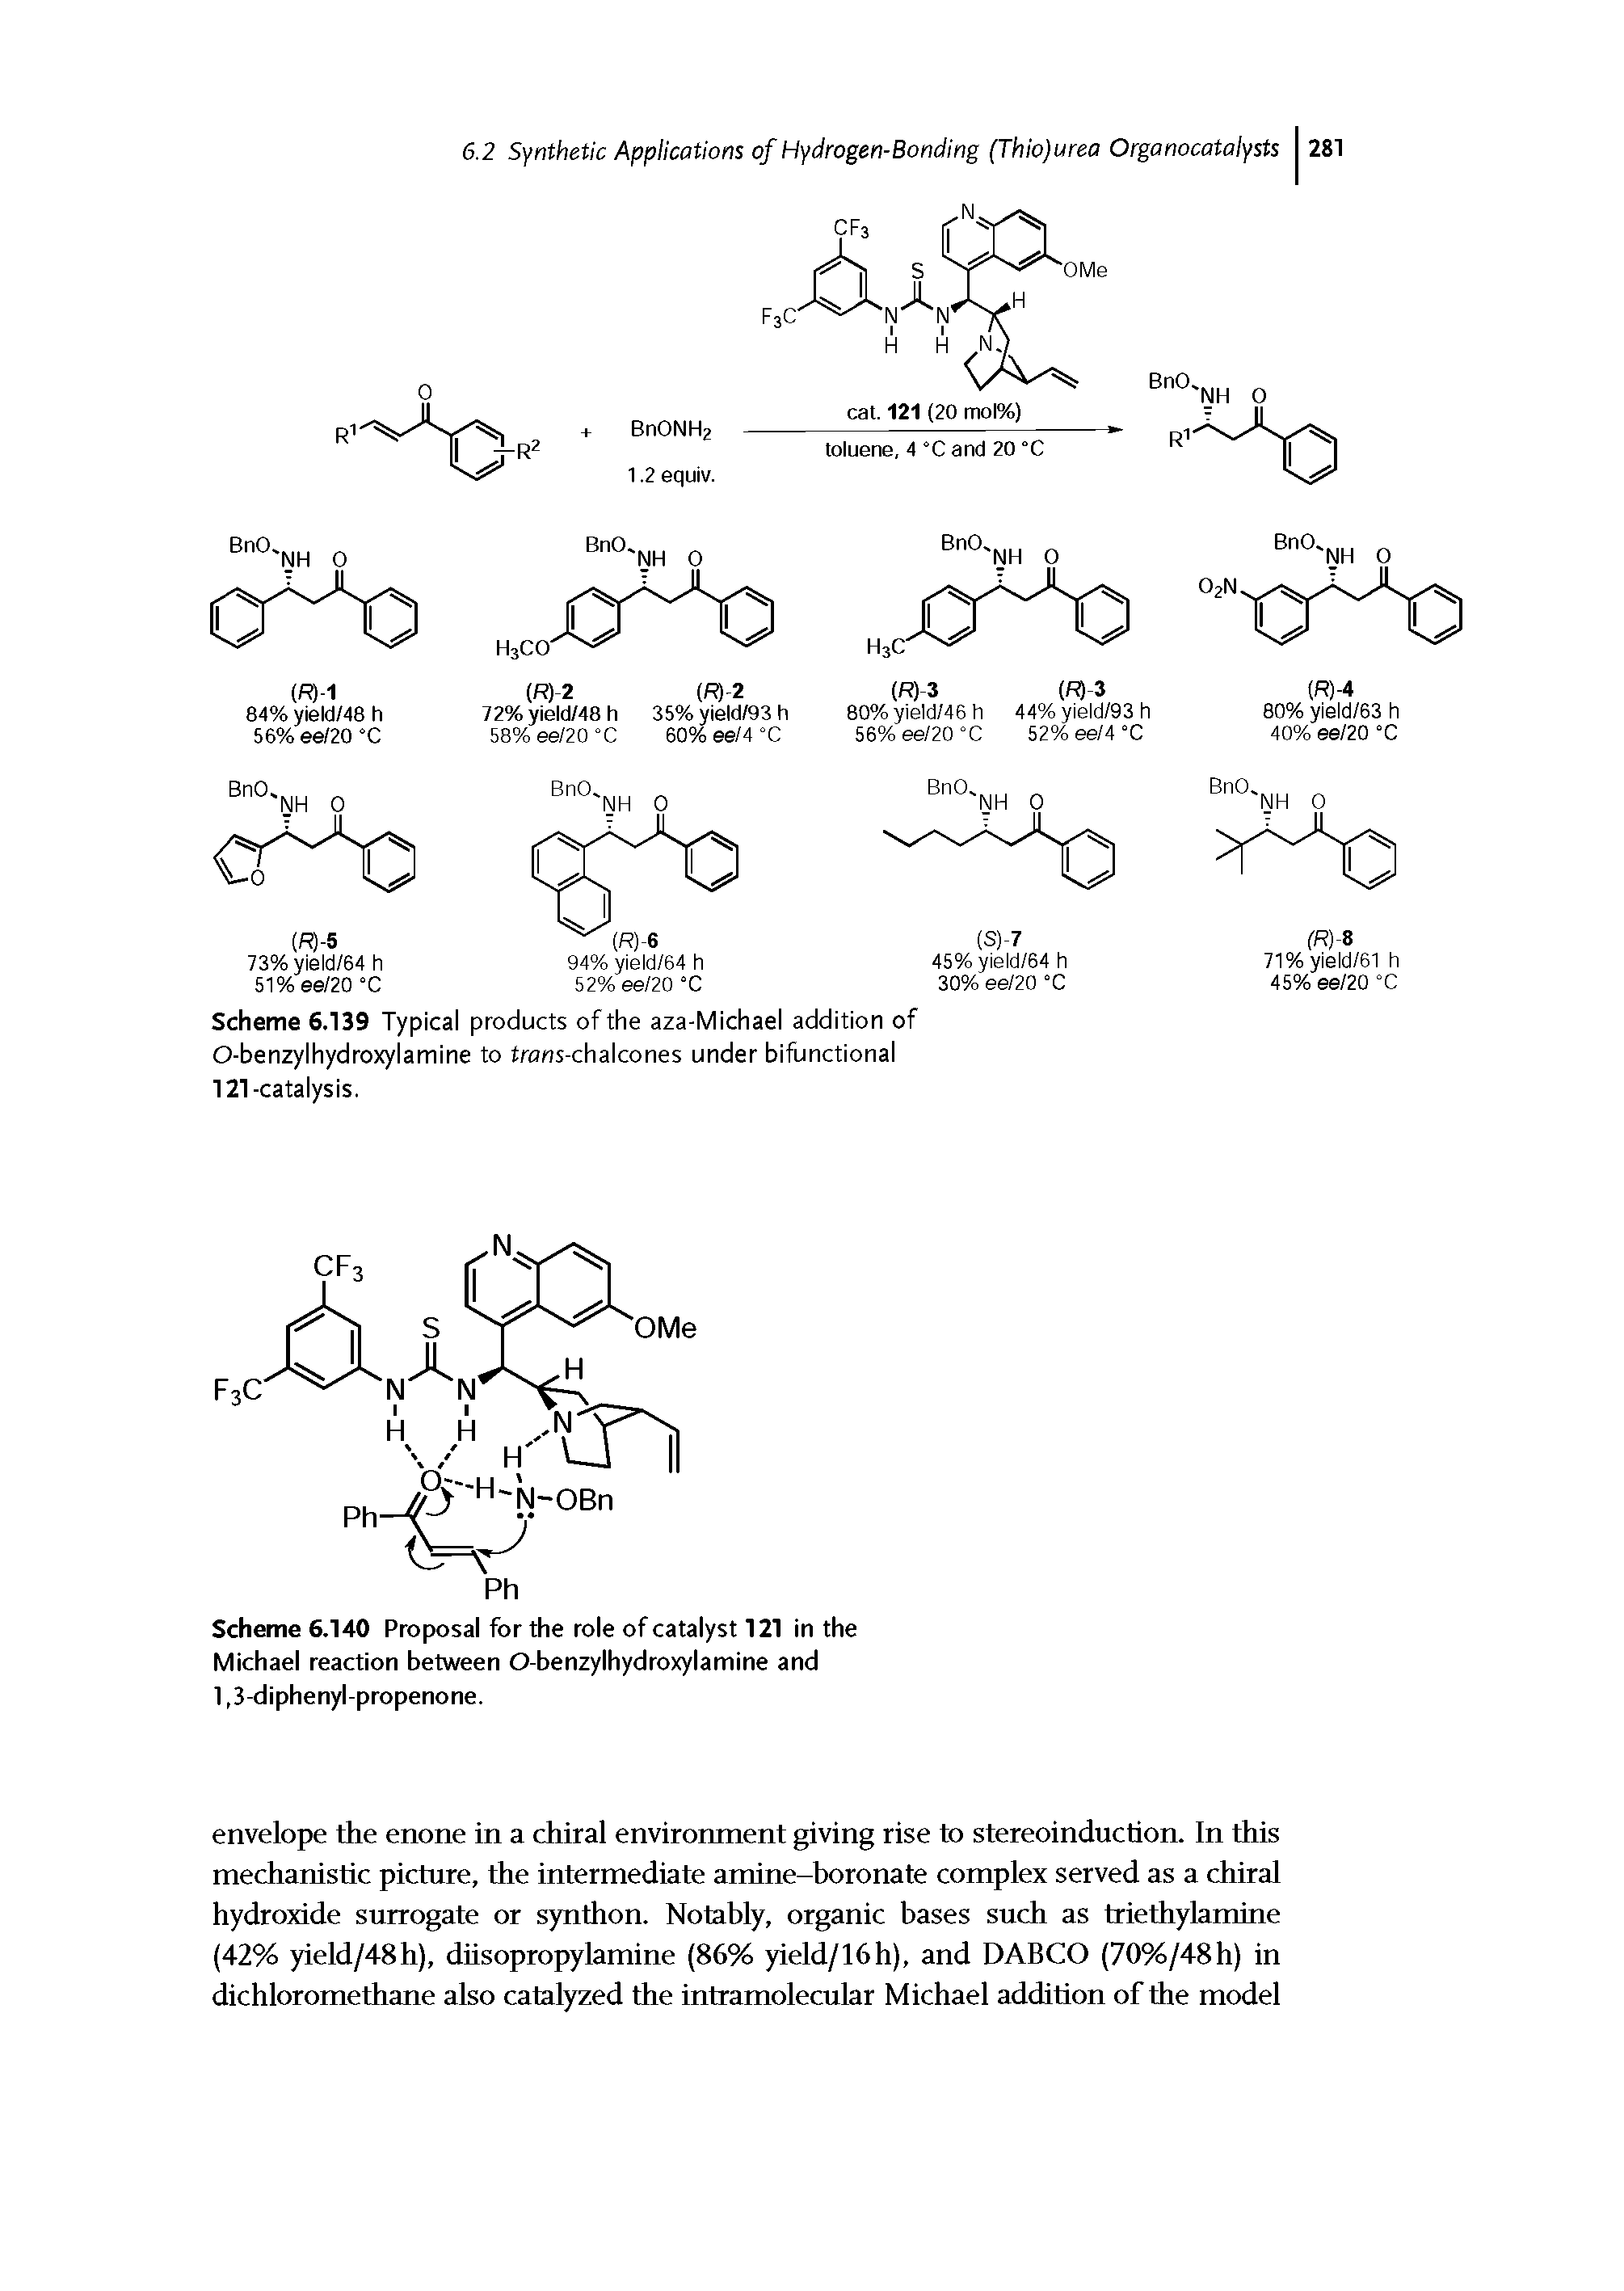 Scheme 6.140 Proposal for the role of catalyst 121 in the Michael reaction between O-benzylhydroxylamine and 1,3-diphenyl-propenone.